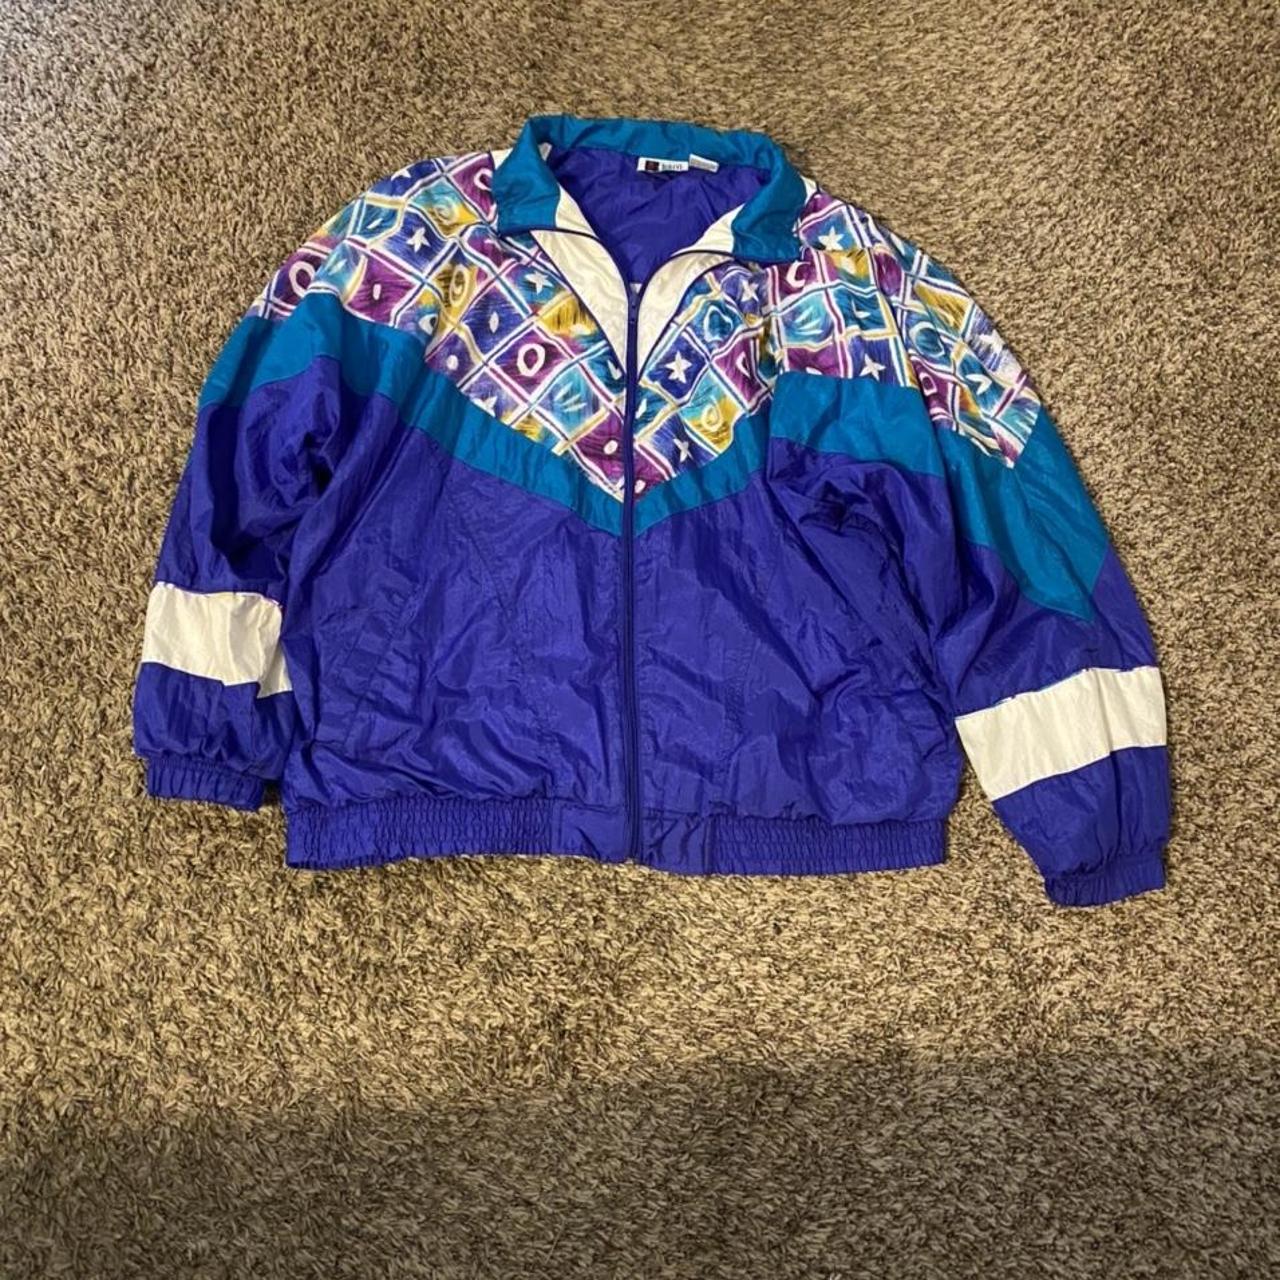 item listed by thekeythrifts